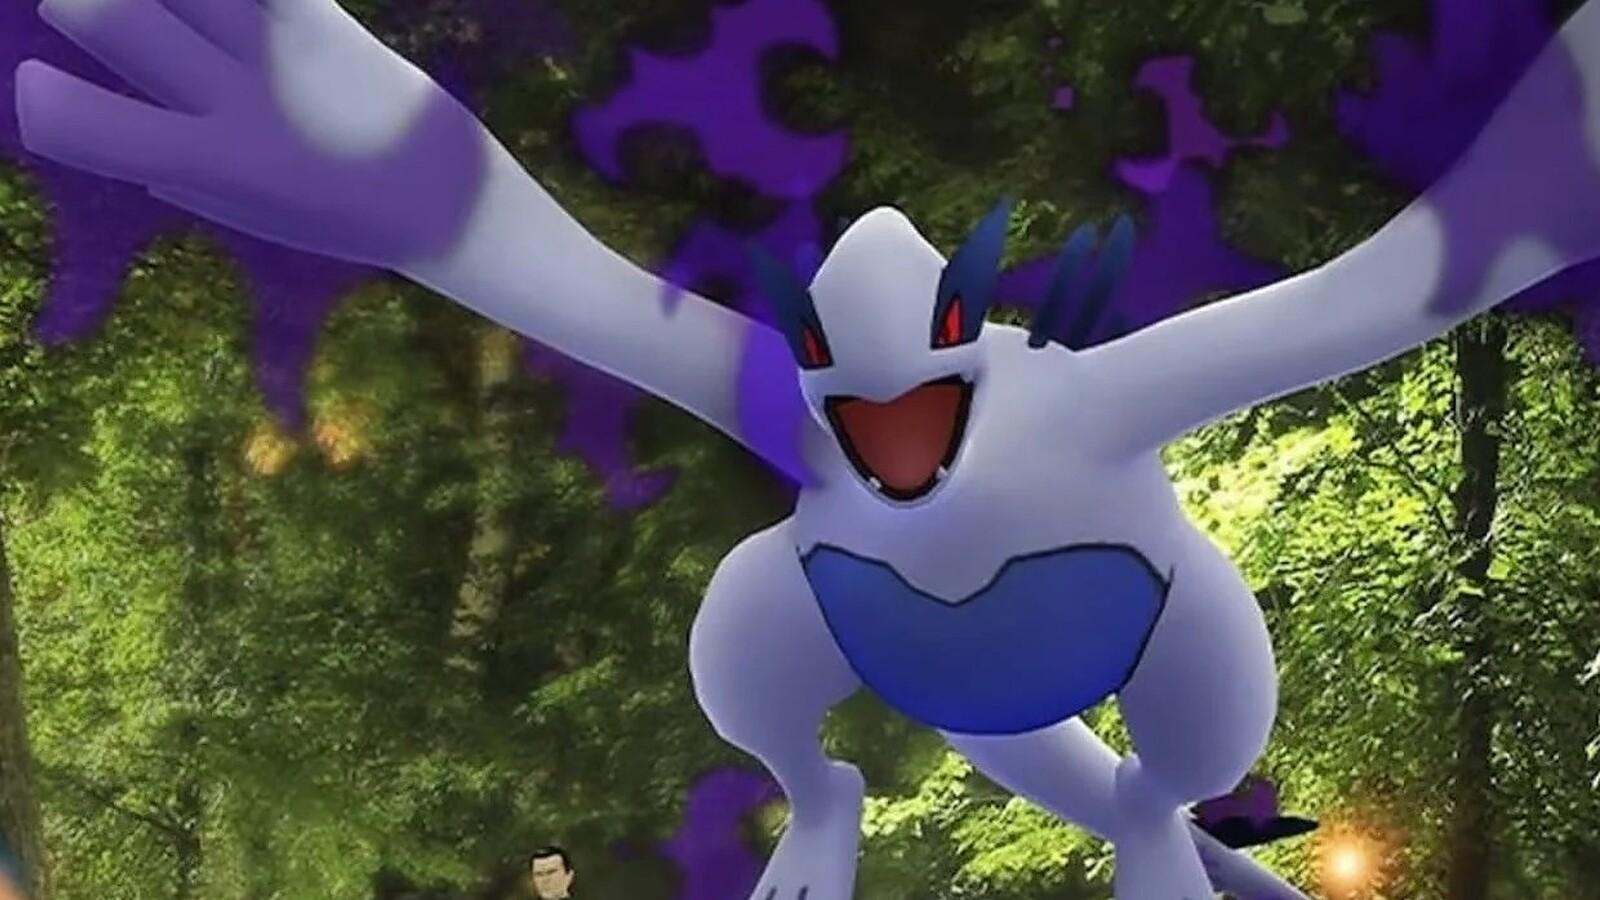 Can You Catch a Shiny Lugia in Pokemon Go?